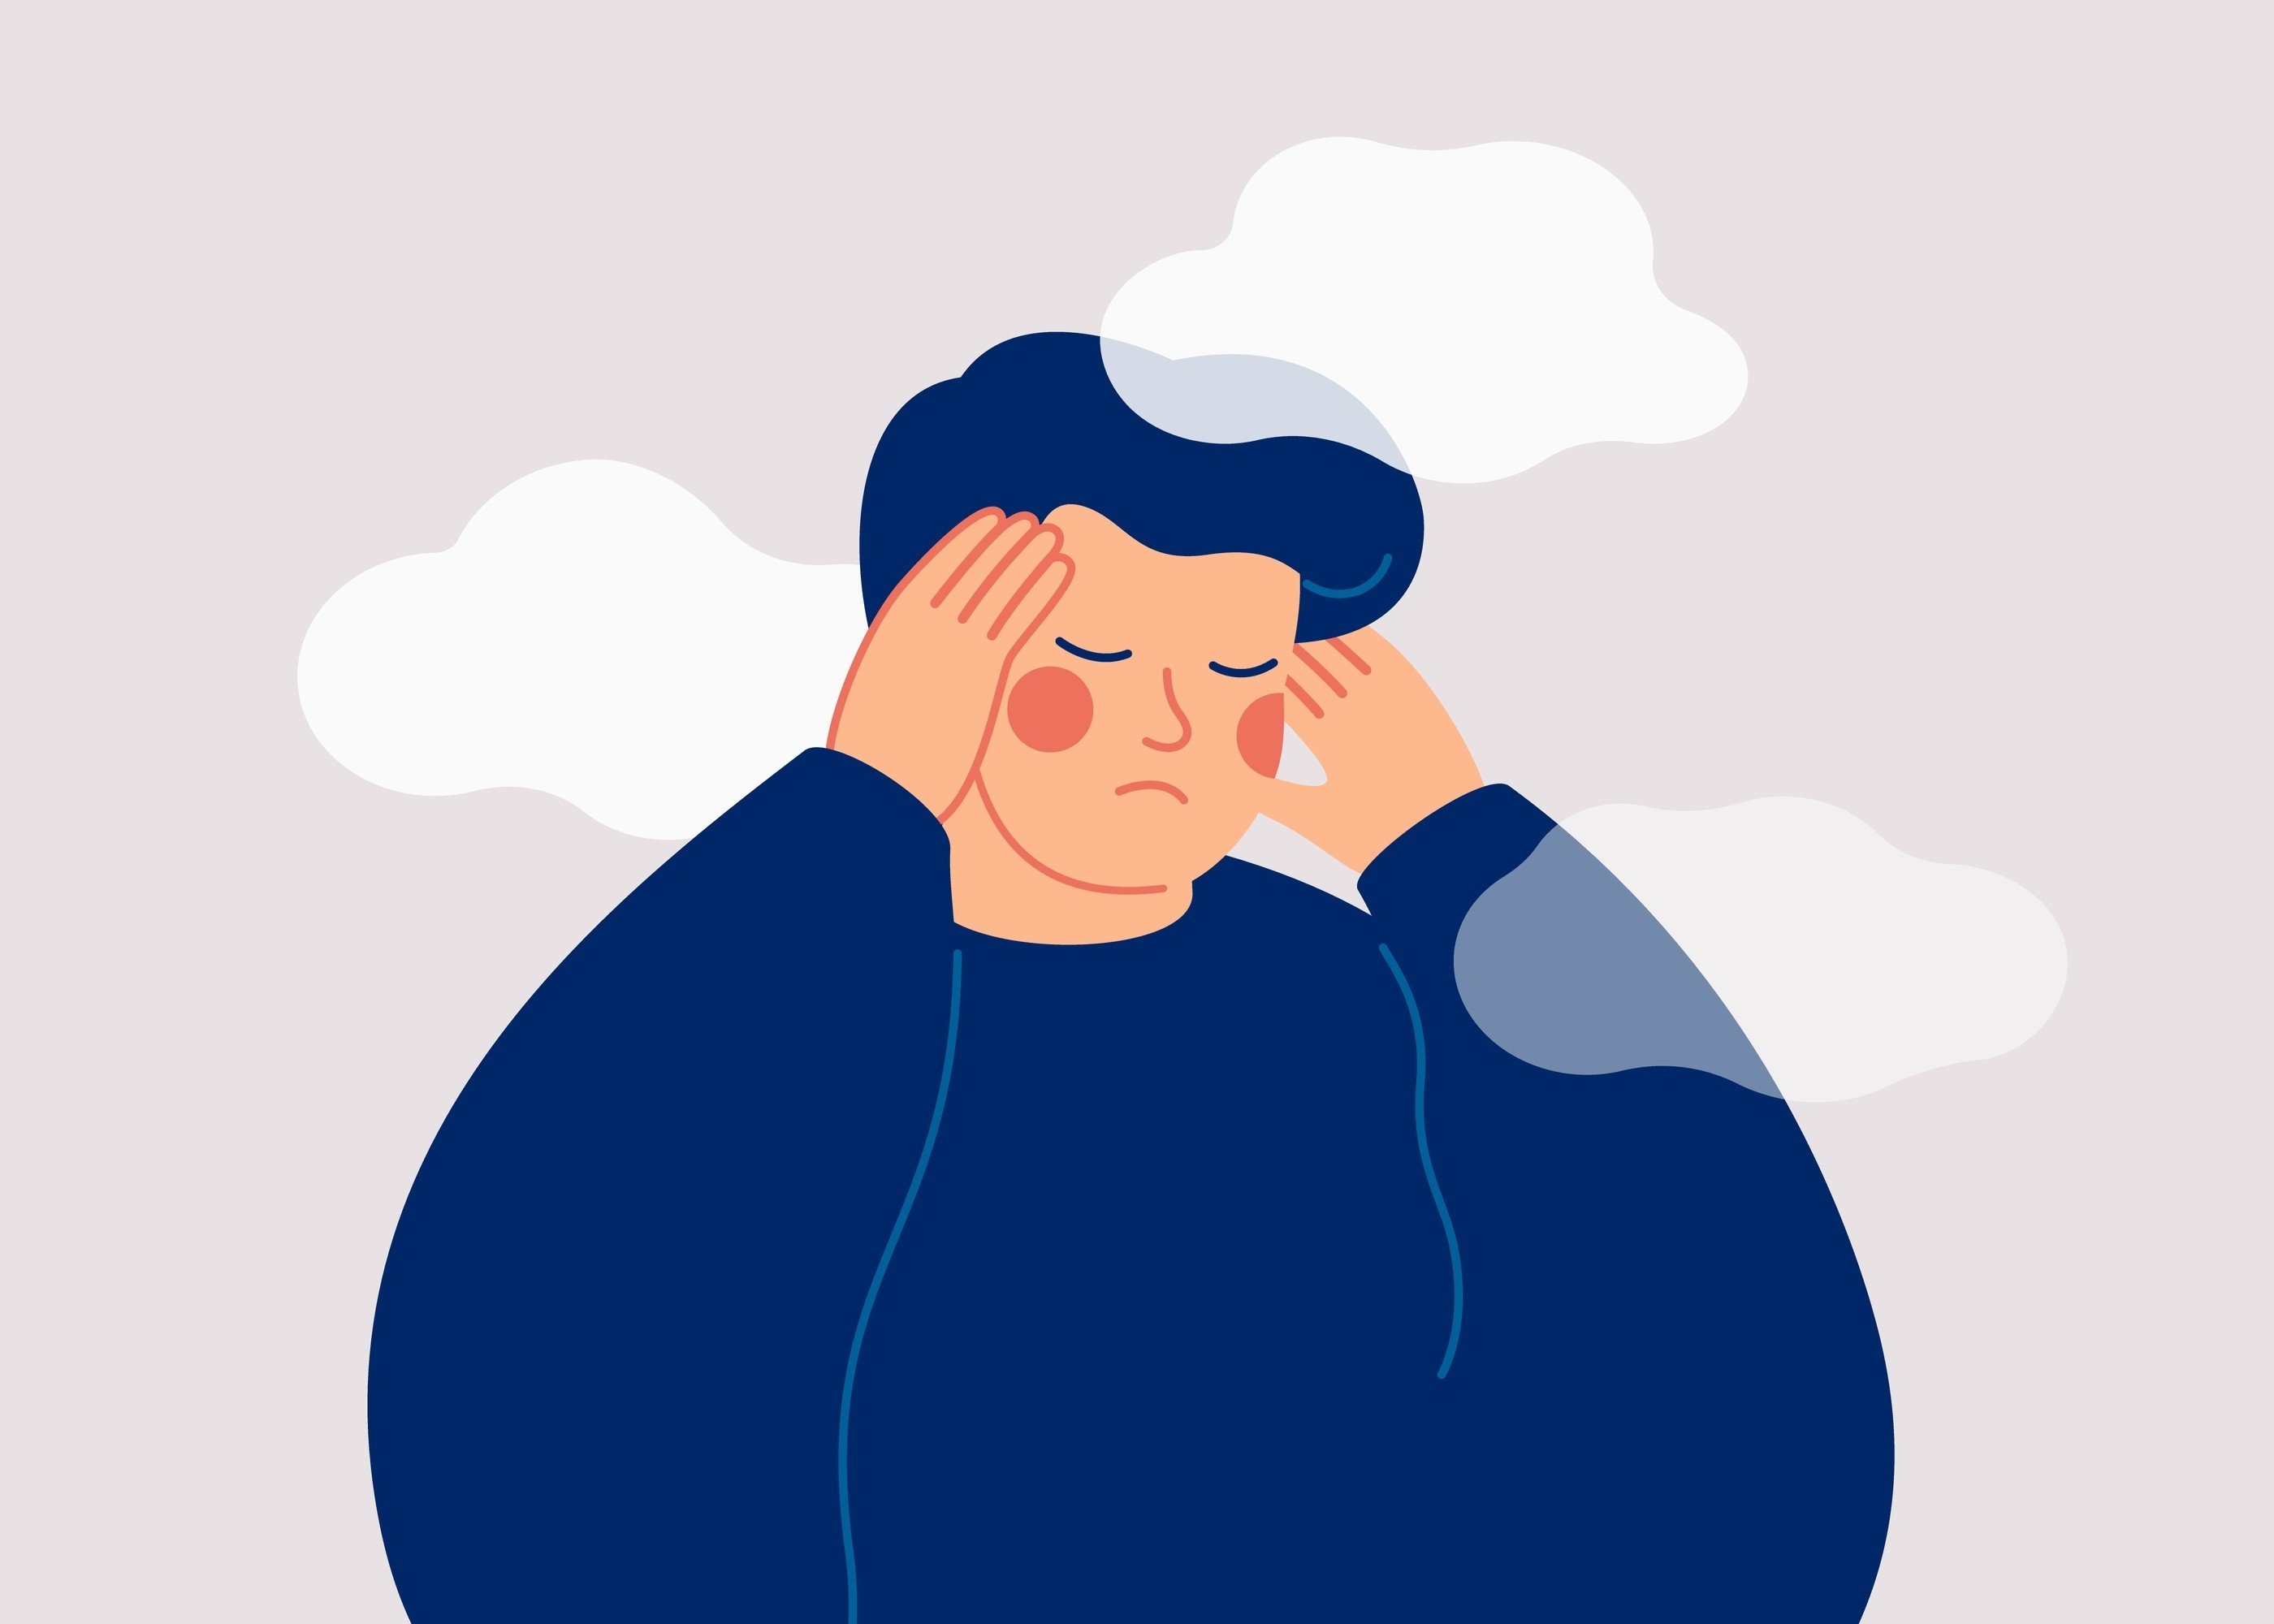 Many have reported feeling “brain fog” after having Covid-19. Photo: Shutterstock